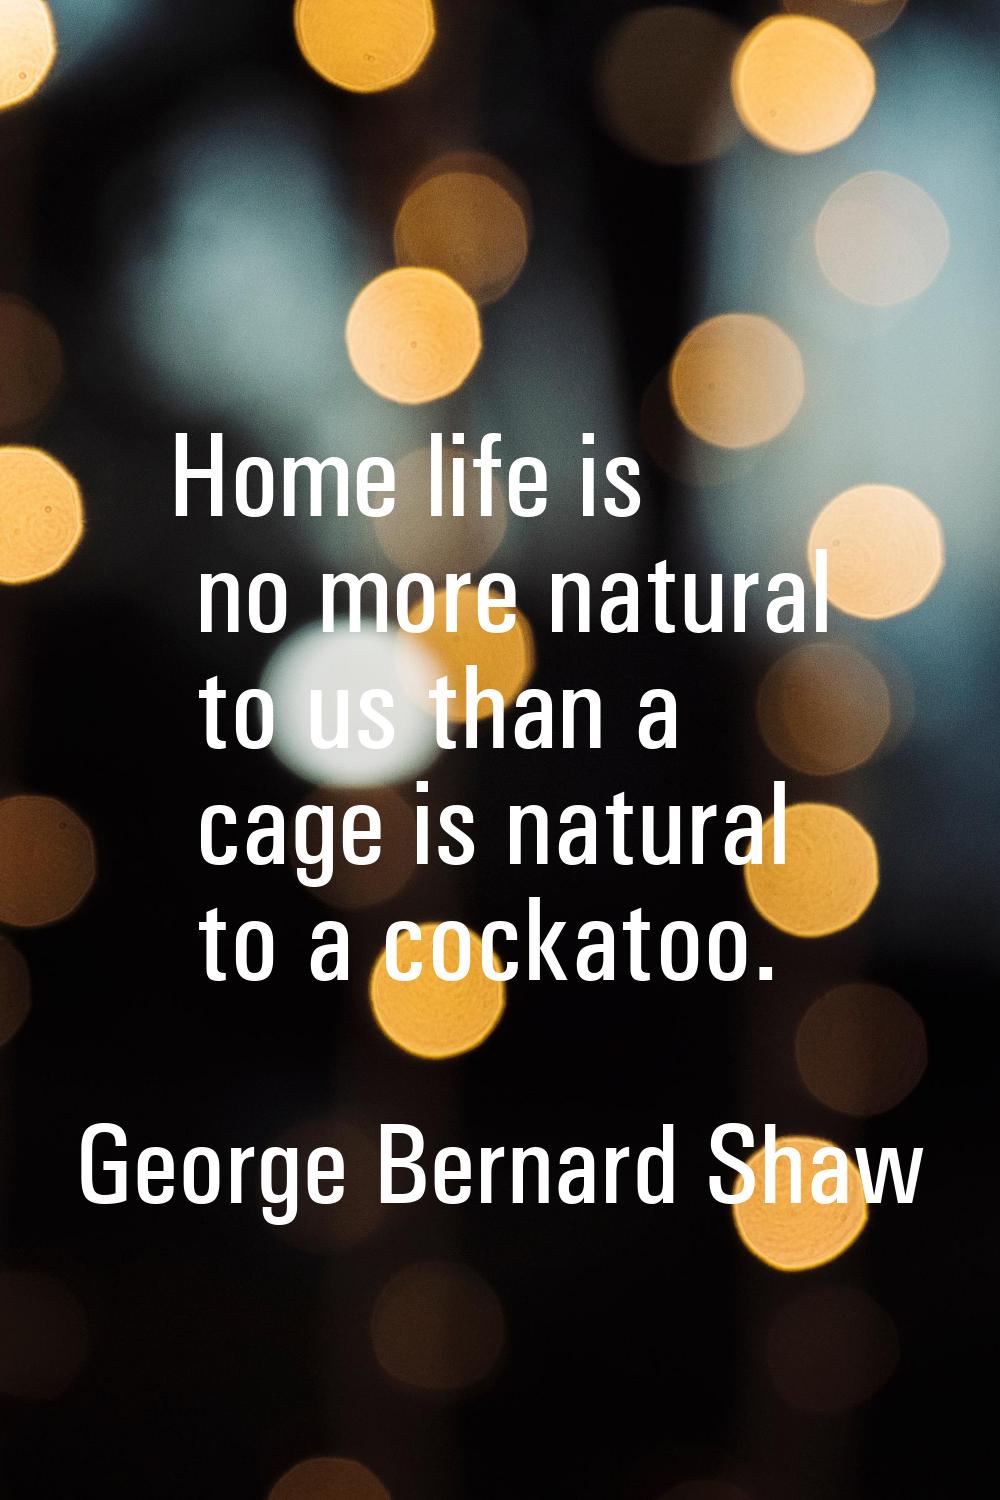 Home life is no more natural to us than a cage is natural to a cockatoo.